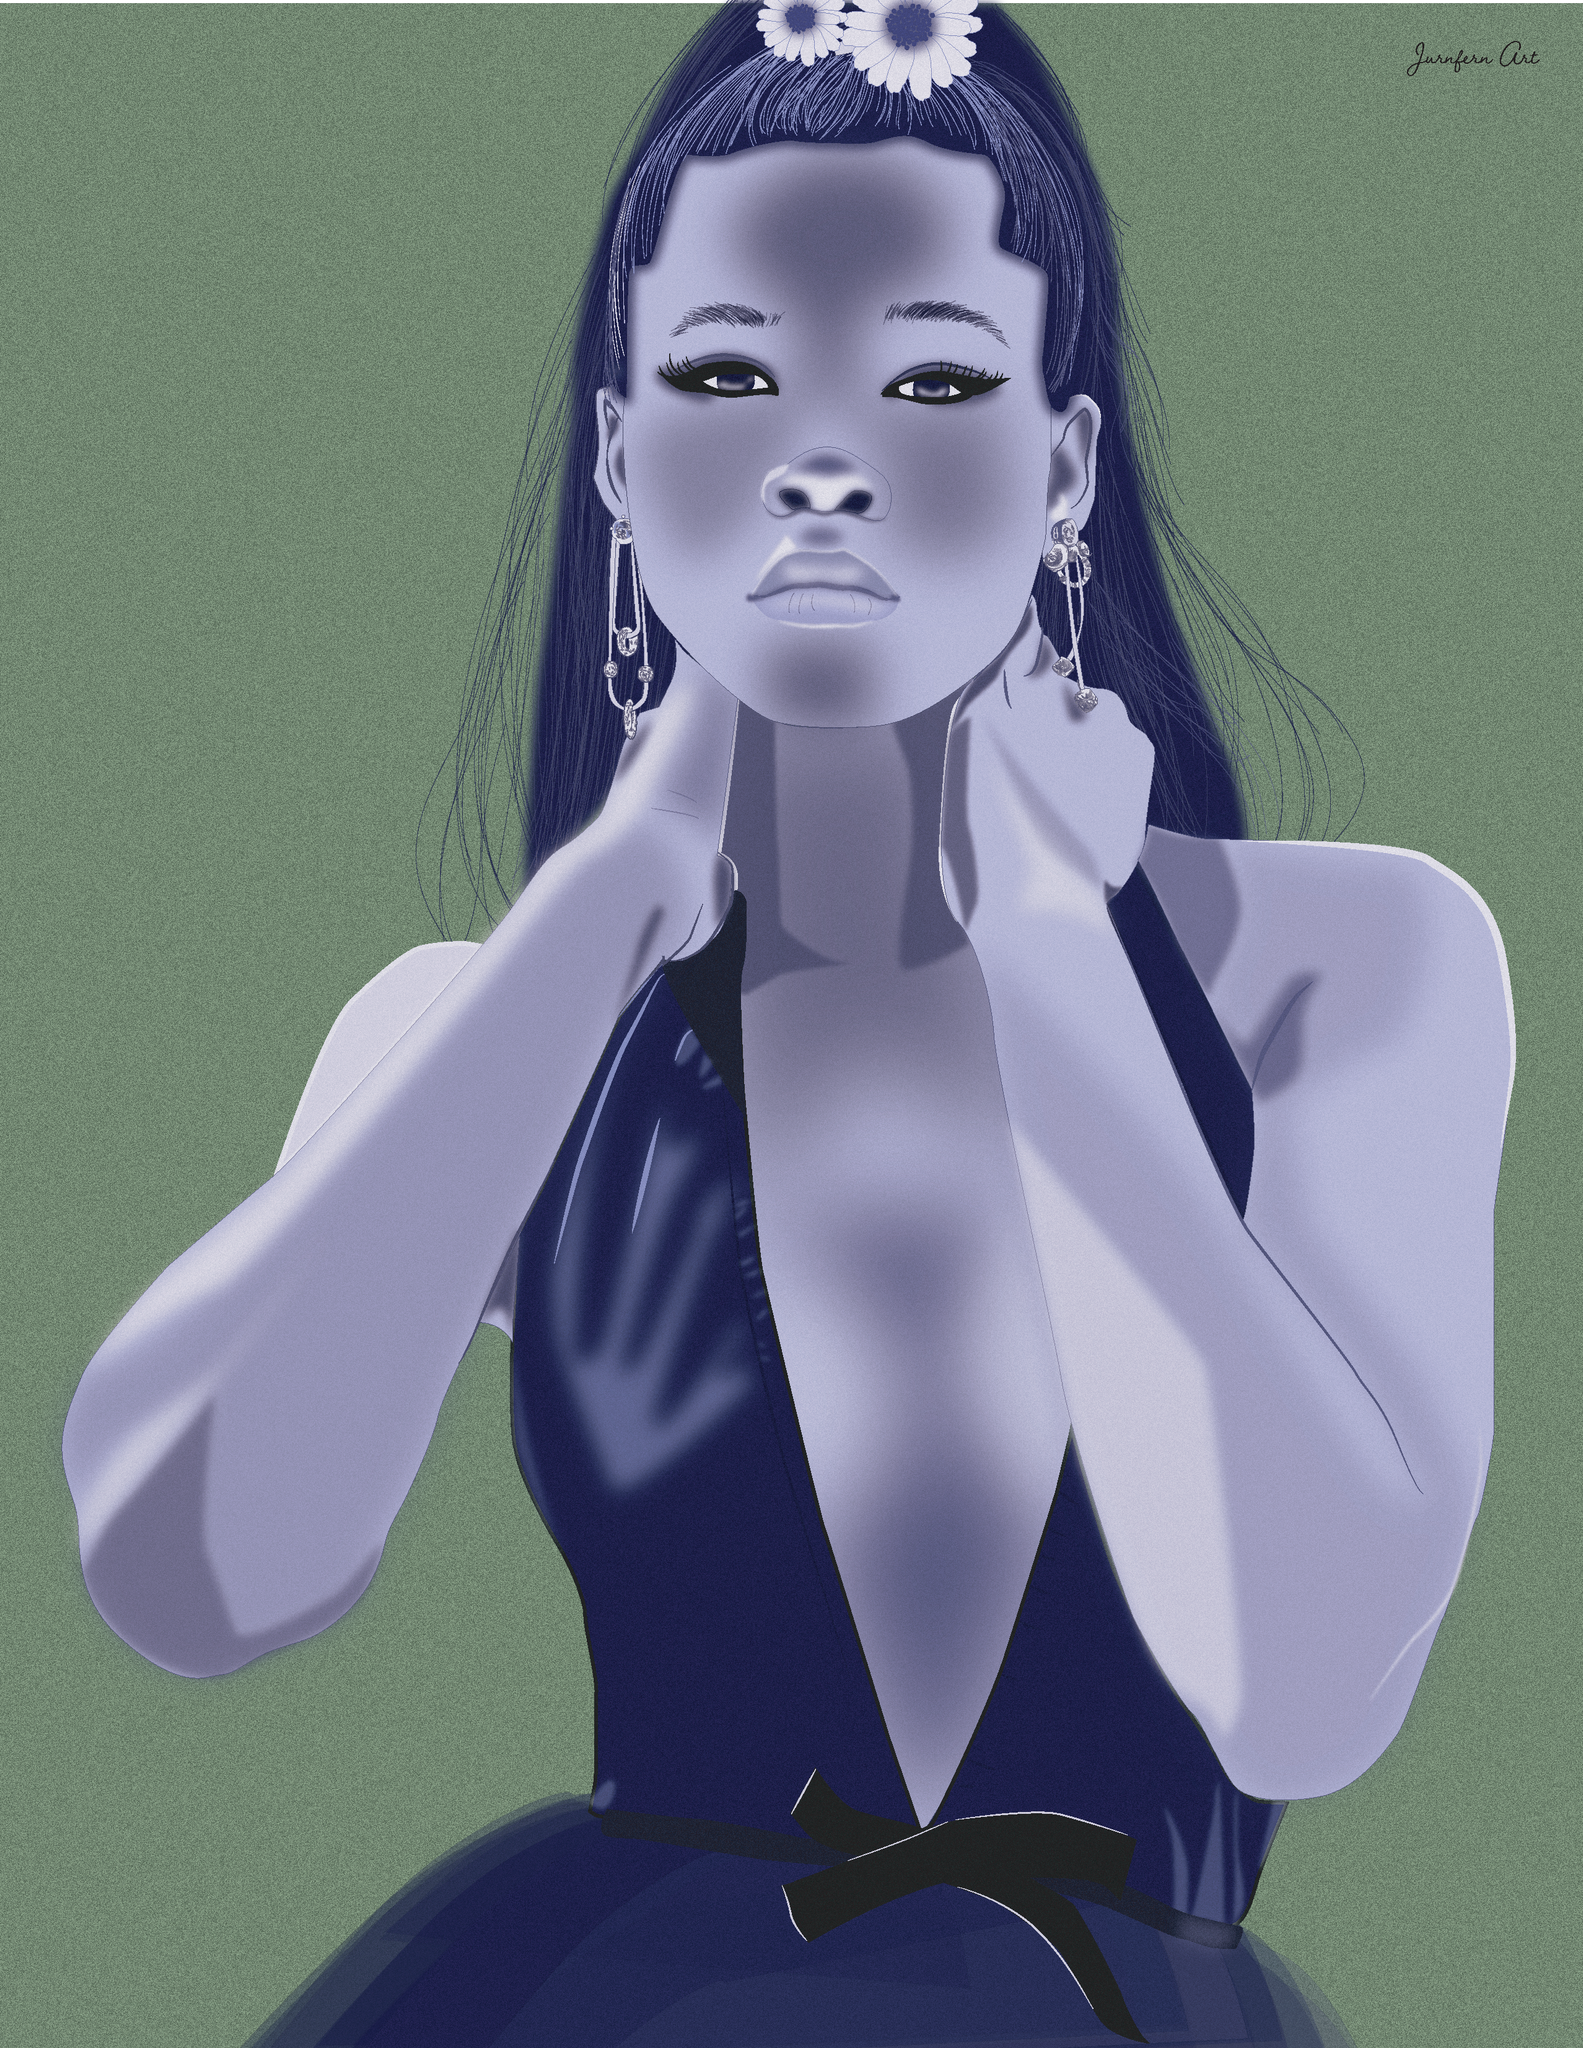 An illustration print with a green background and a blue graphic illustration of actress Storm Reid wearing a deep V-neck dress and flowers in her hair